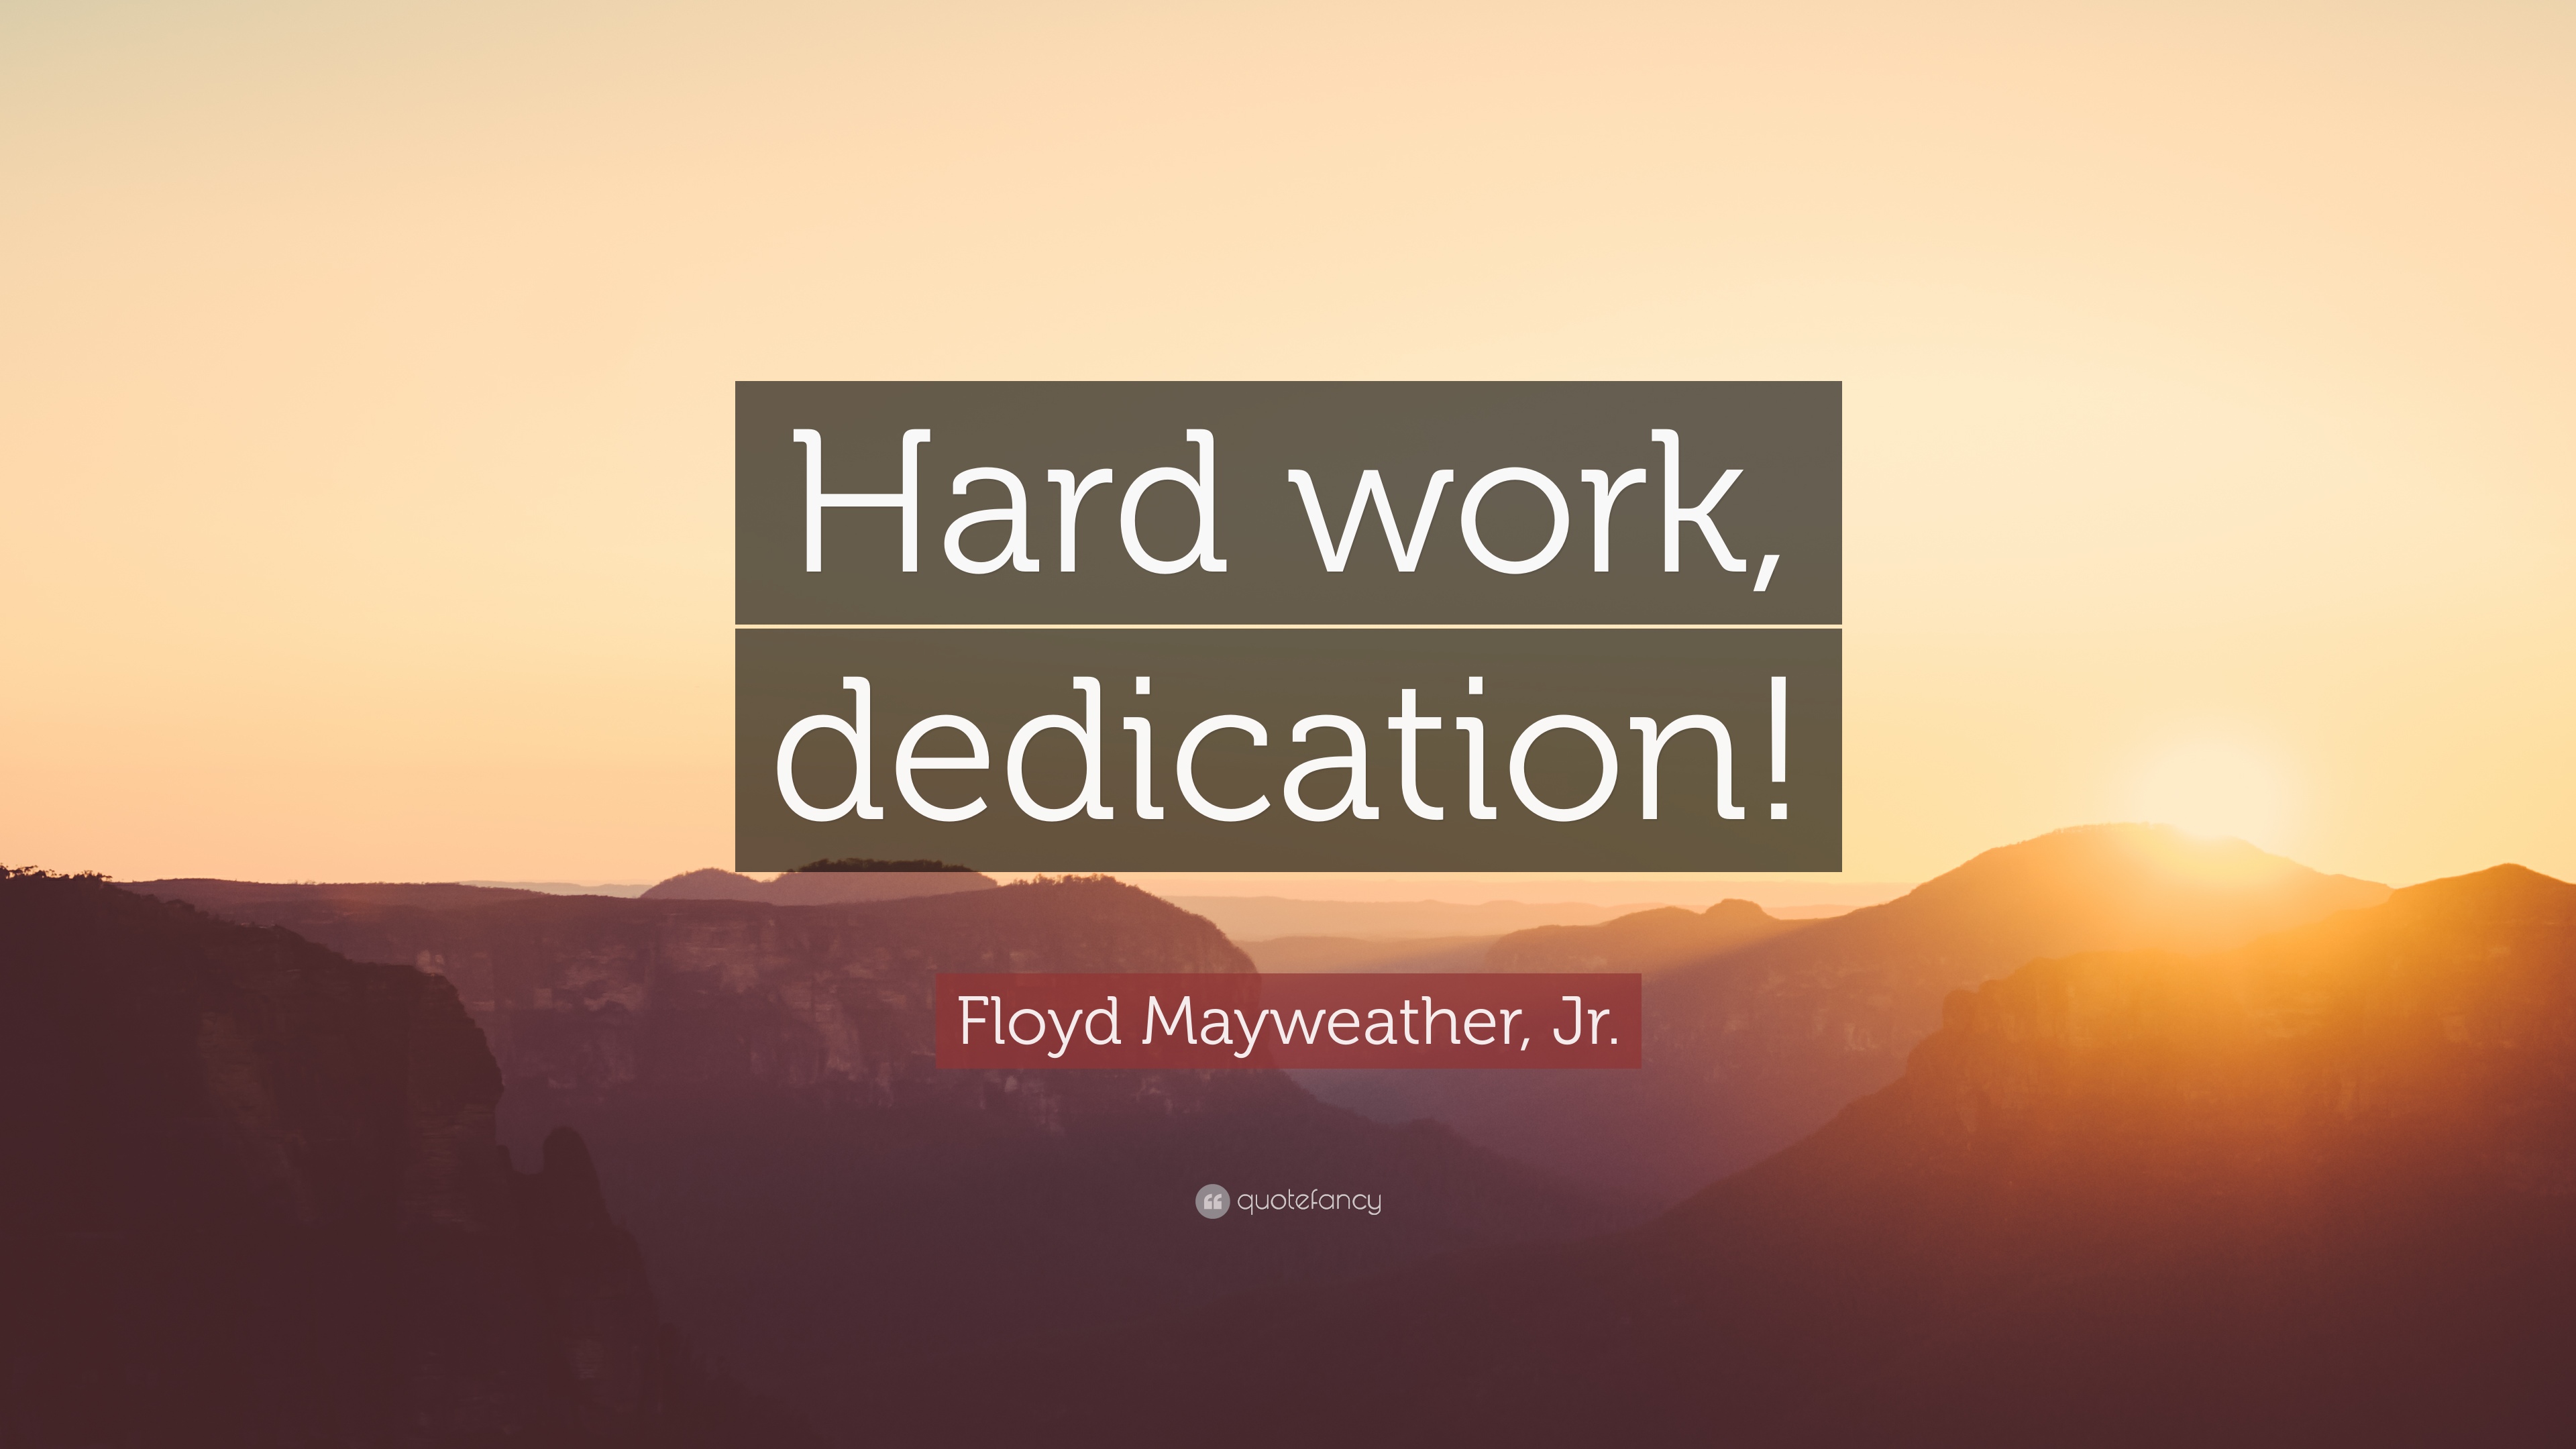 Floyd Mayweather, Jr - You Can T Change Someone's Behaviour - HD Wallpaper 